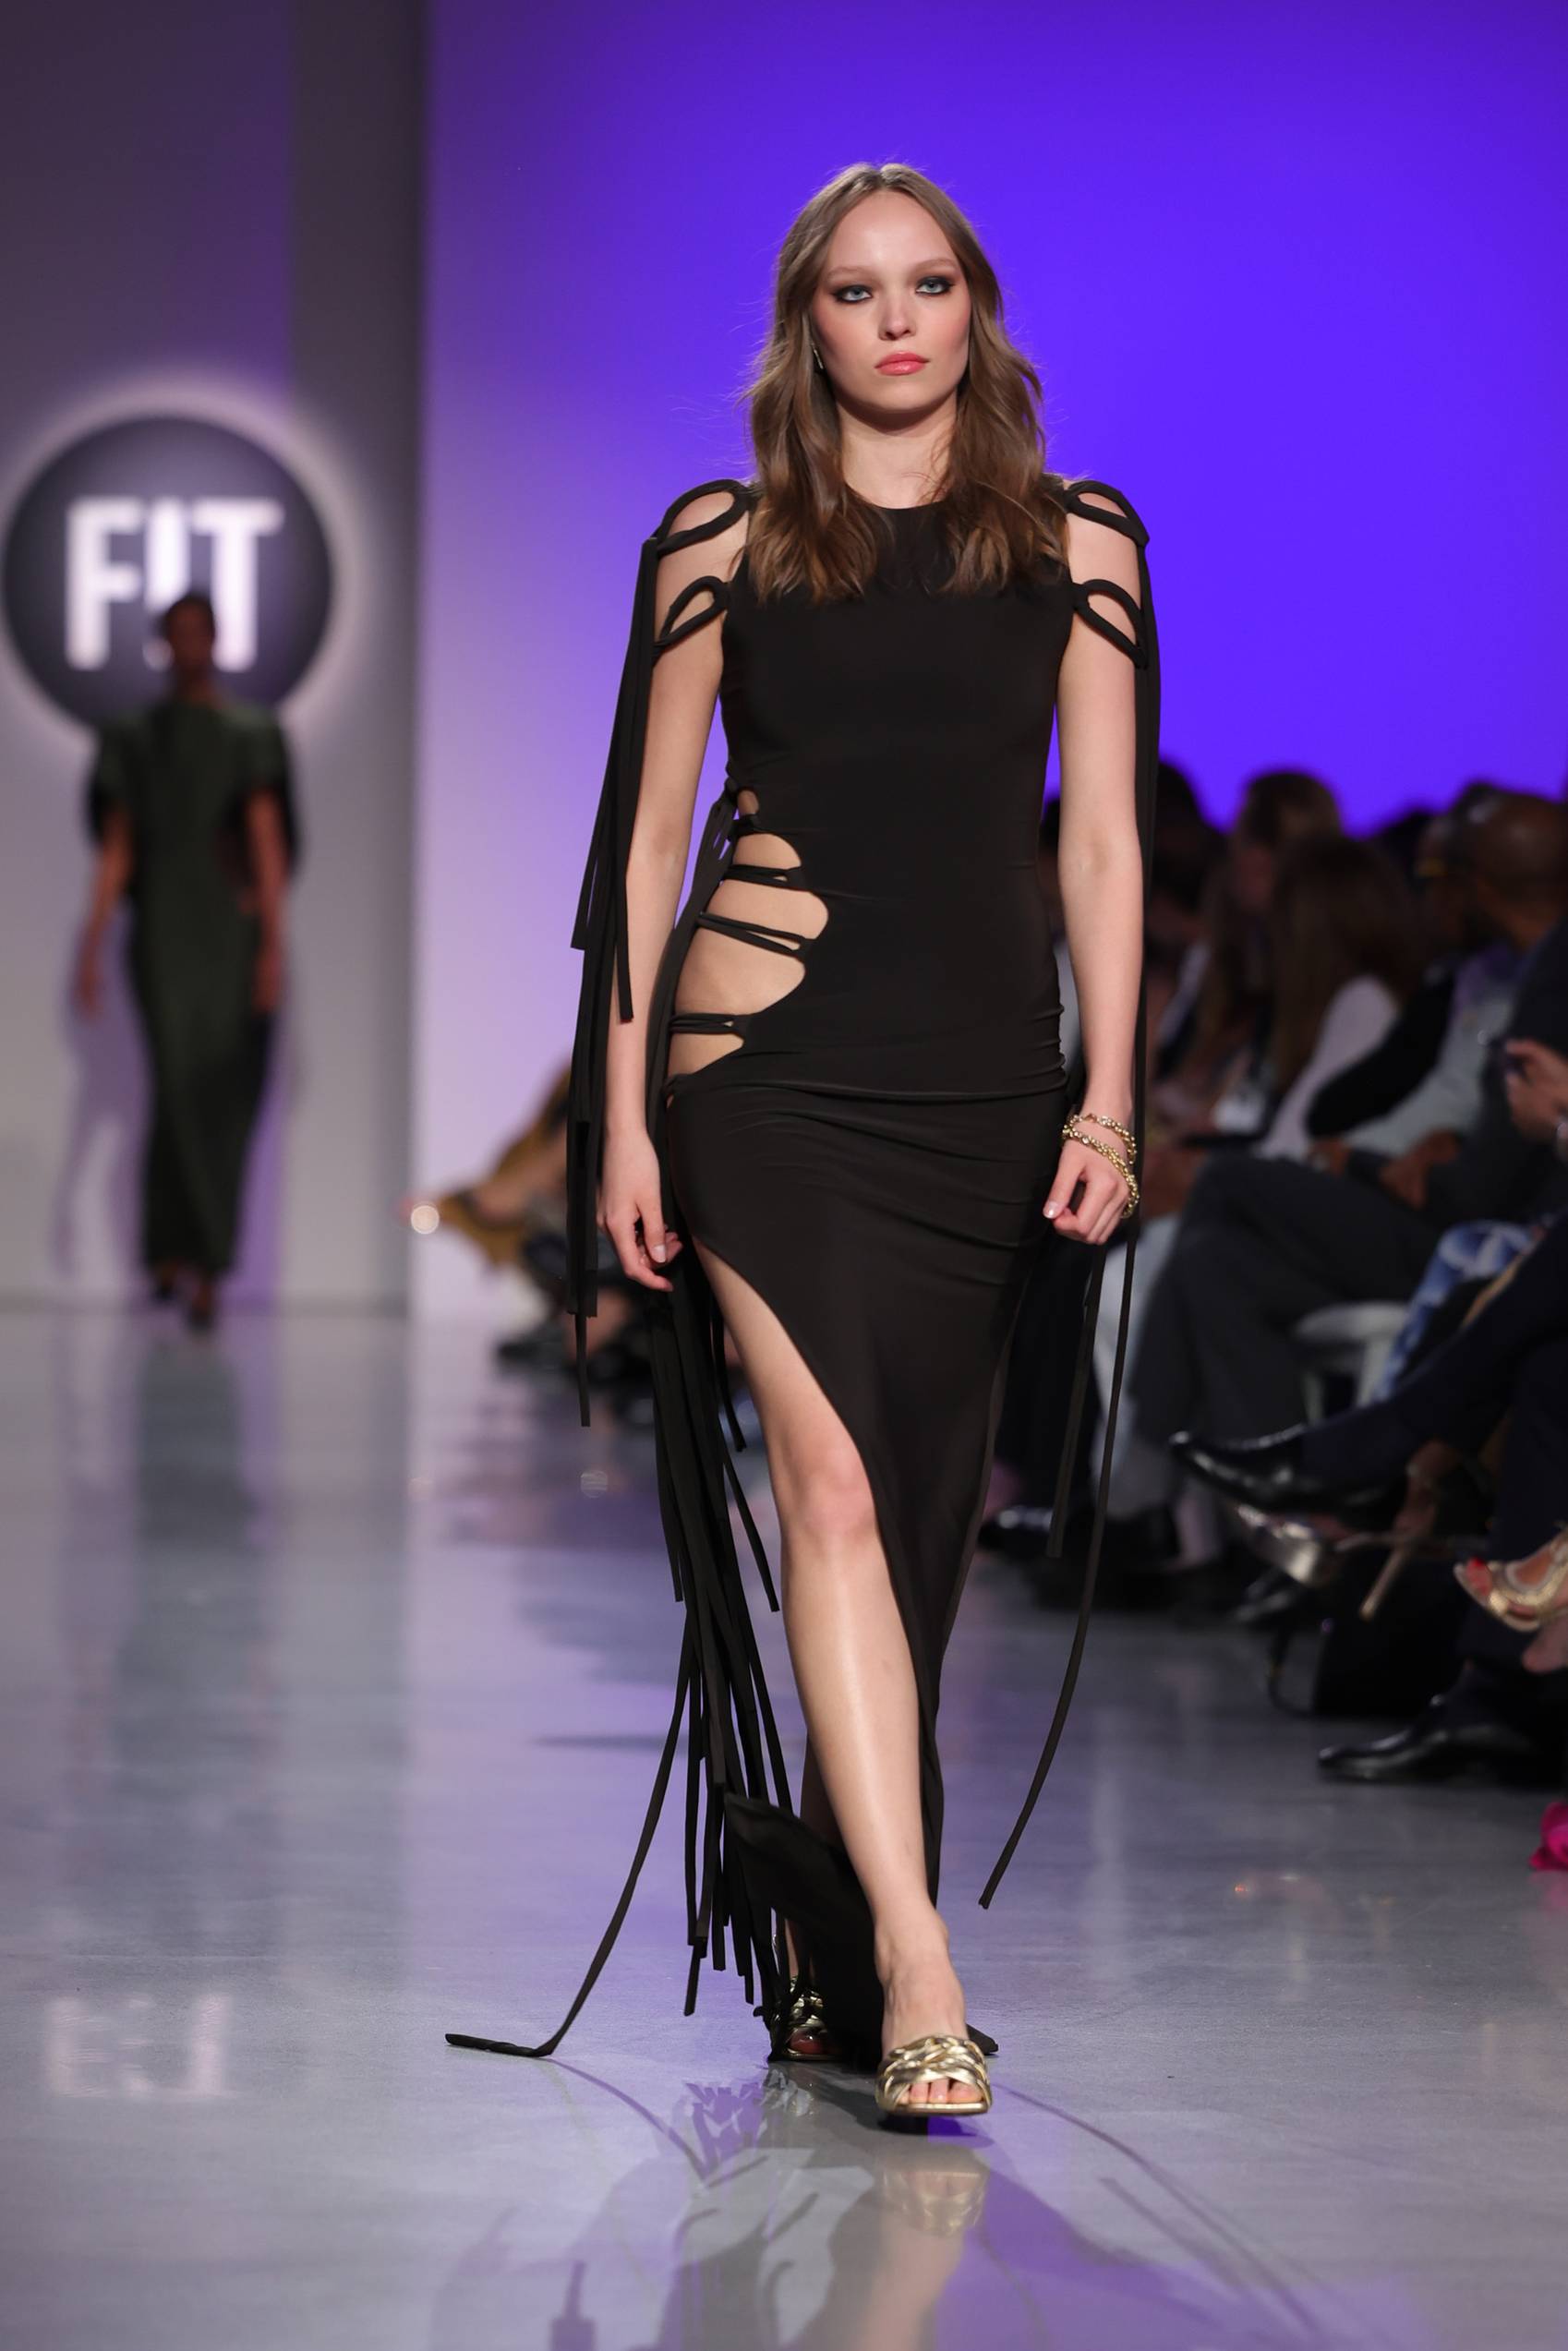 FASHION INSTITUTE OF TECHNOLOGY (FIT) CLASS24